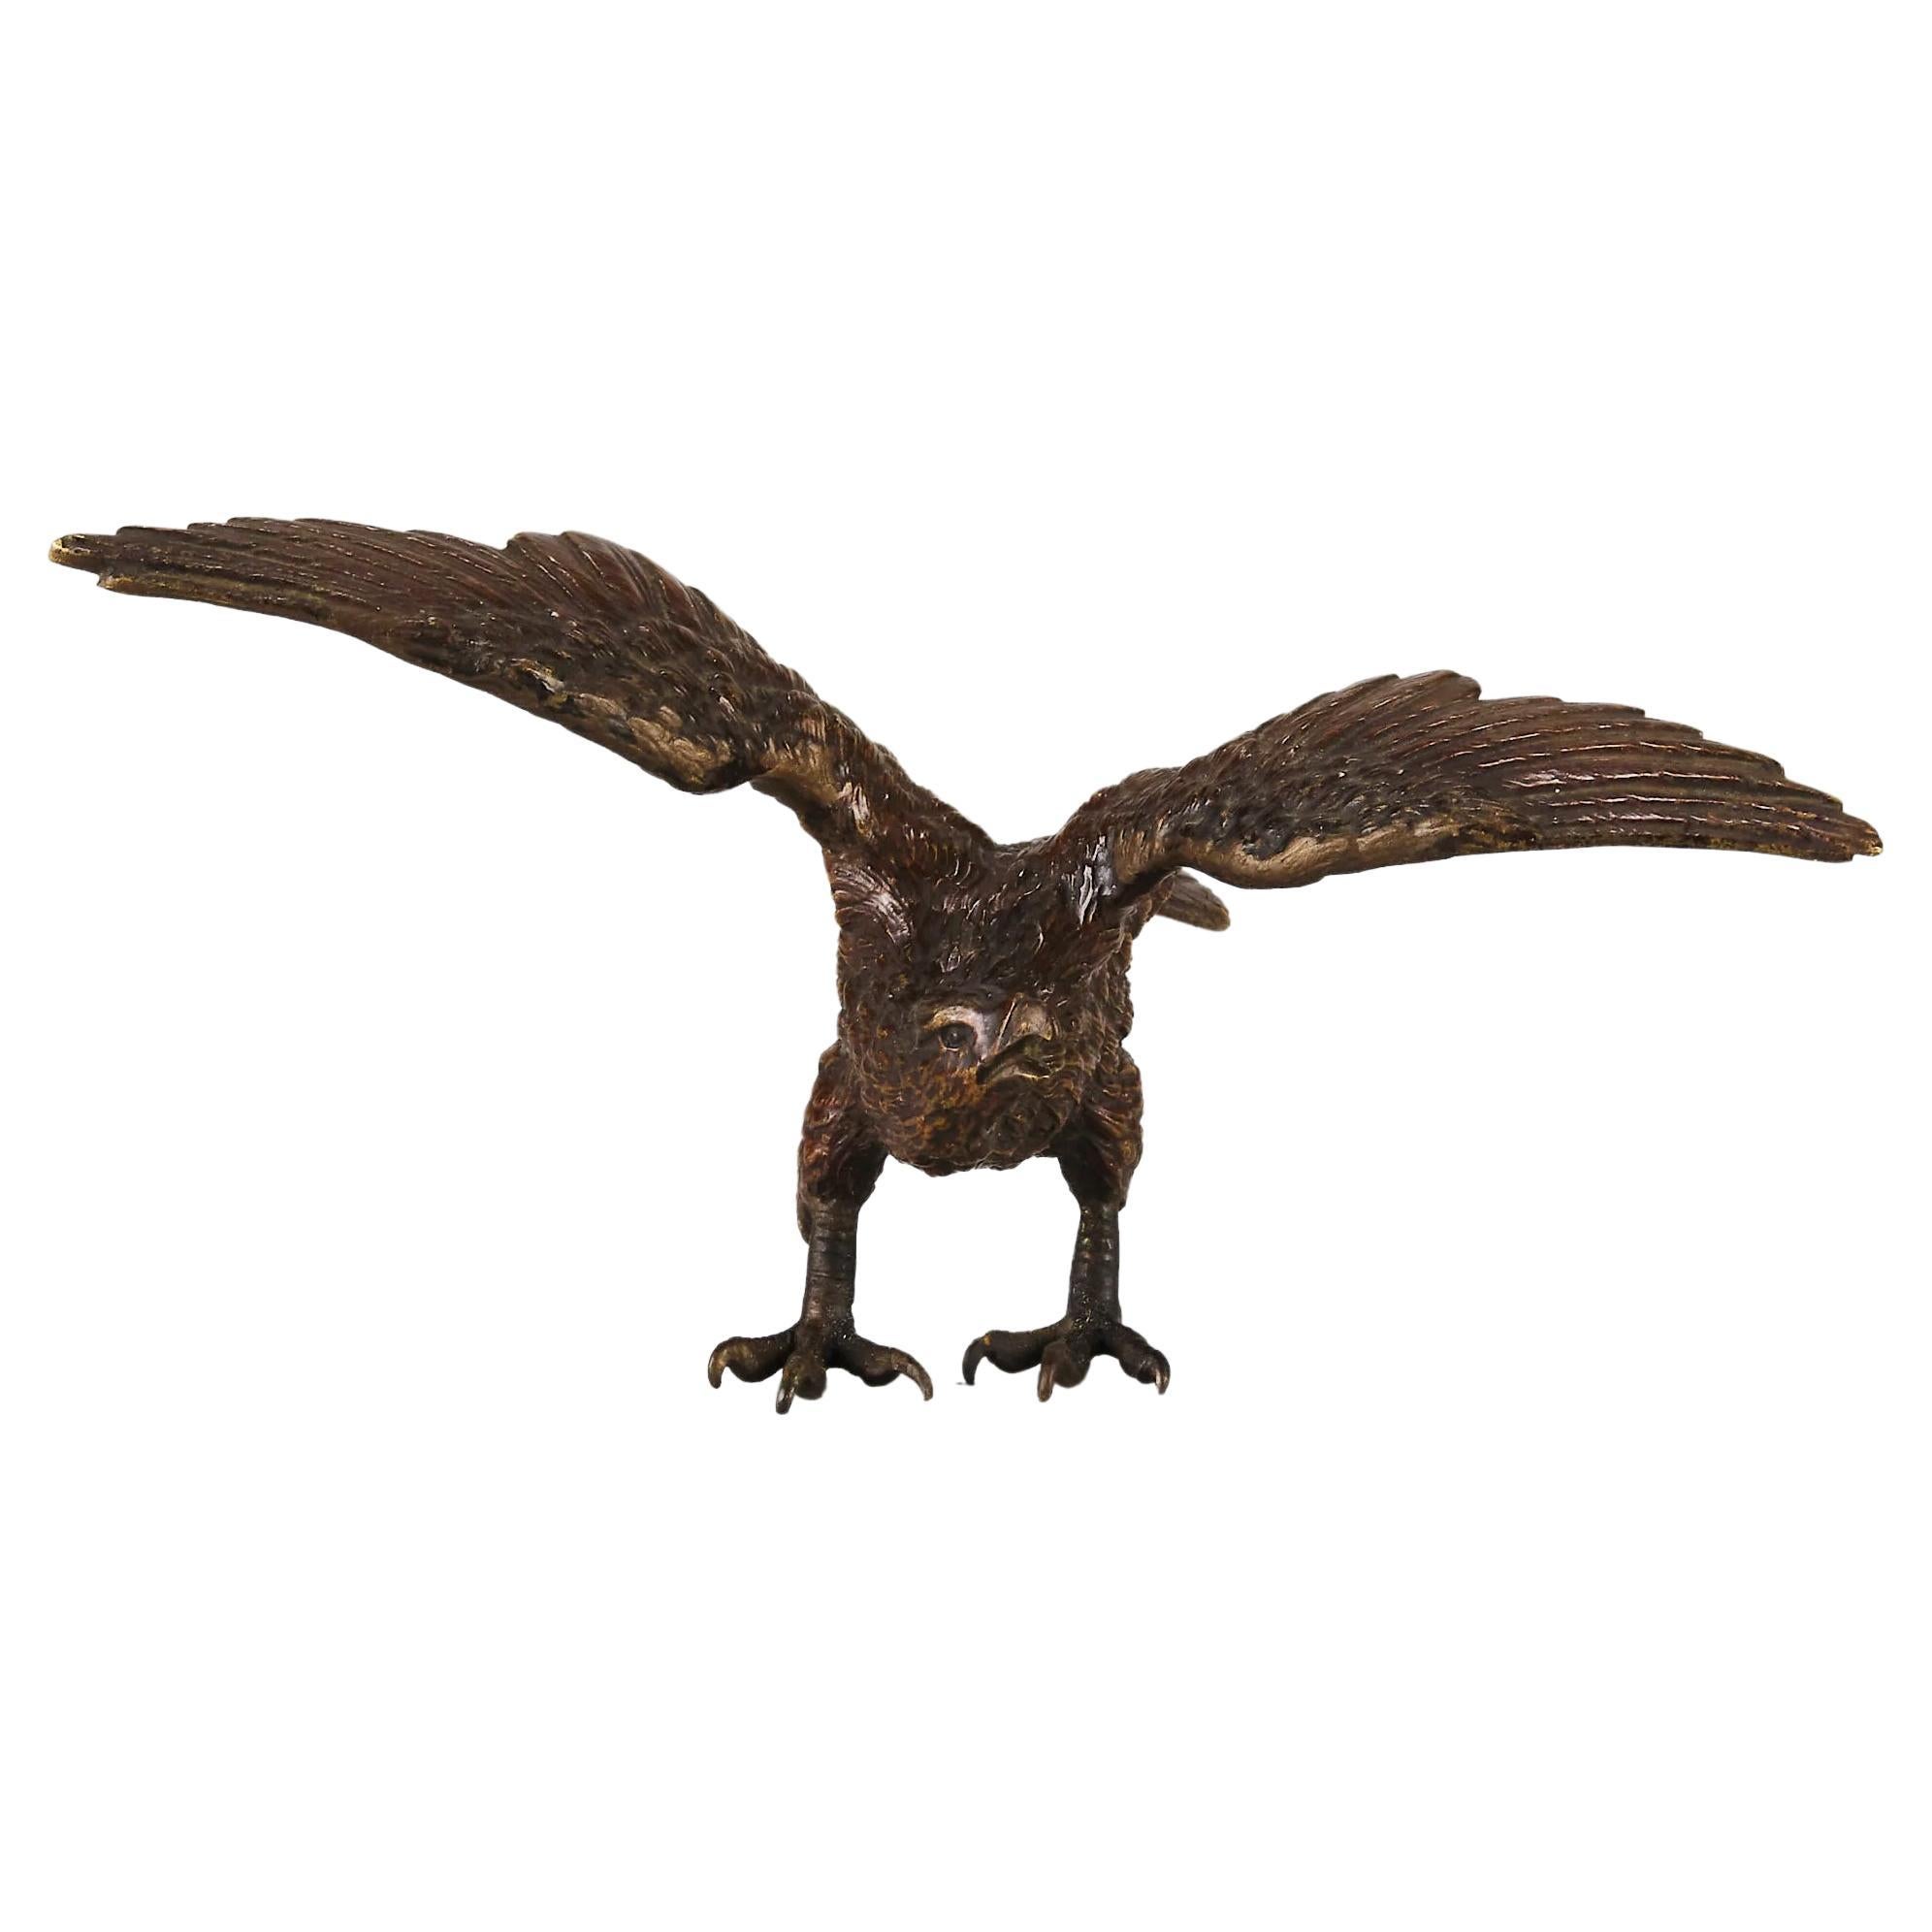 Cold-Painted Bronze Sculpture entitled "Eagle with Outspread Wings" by Bergman For Sale